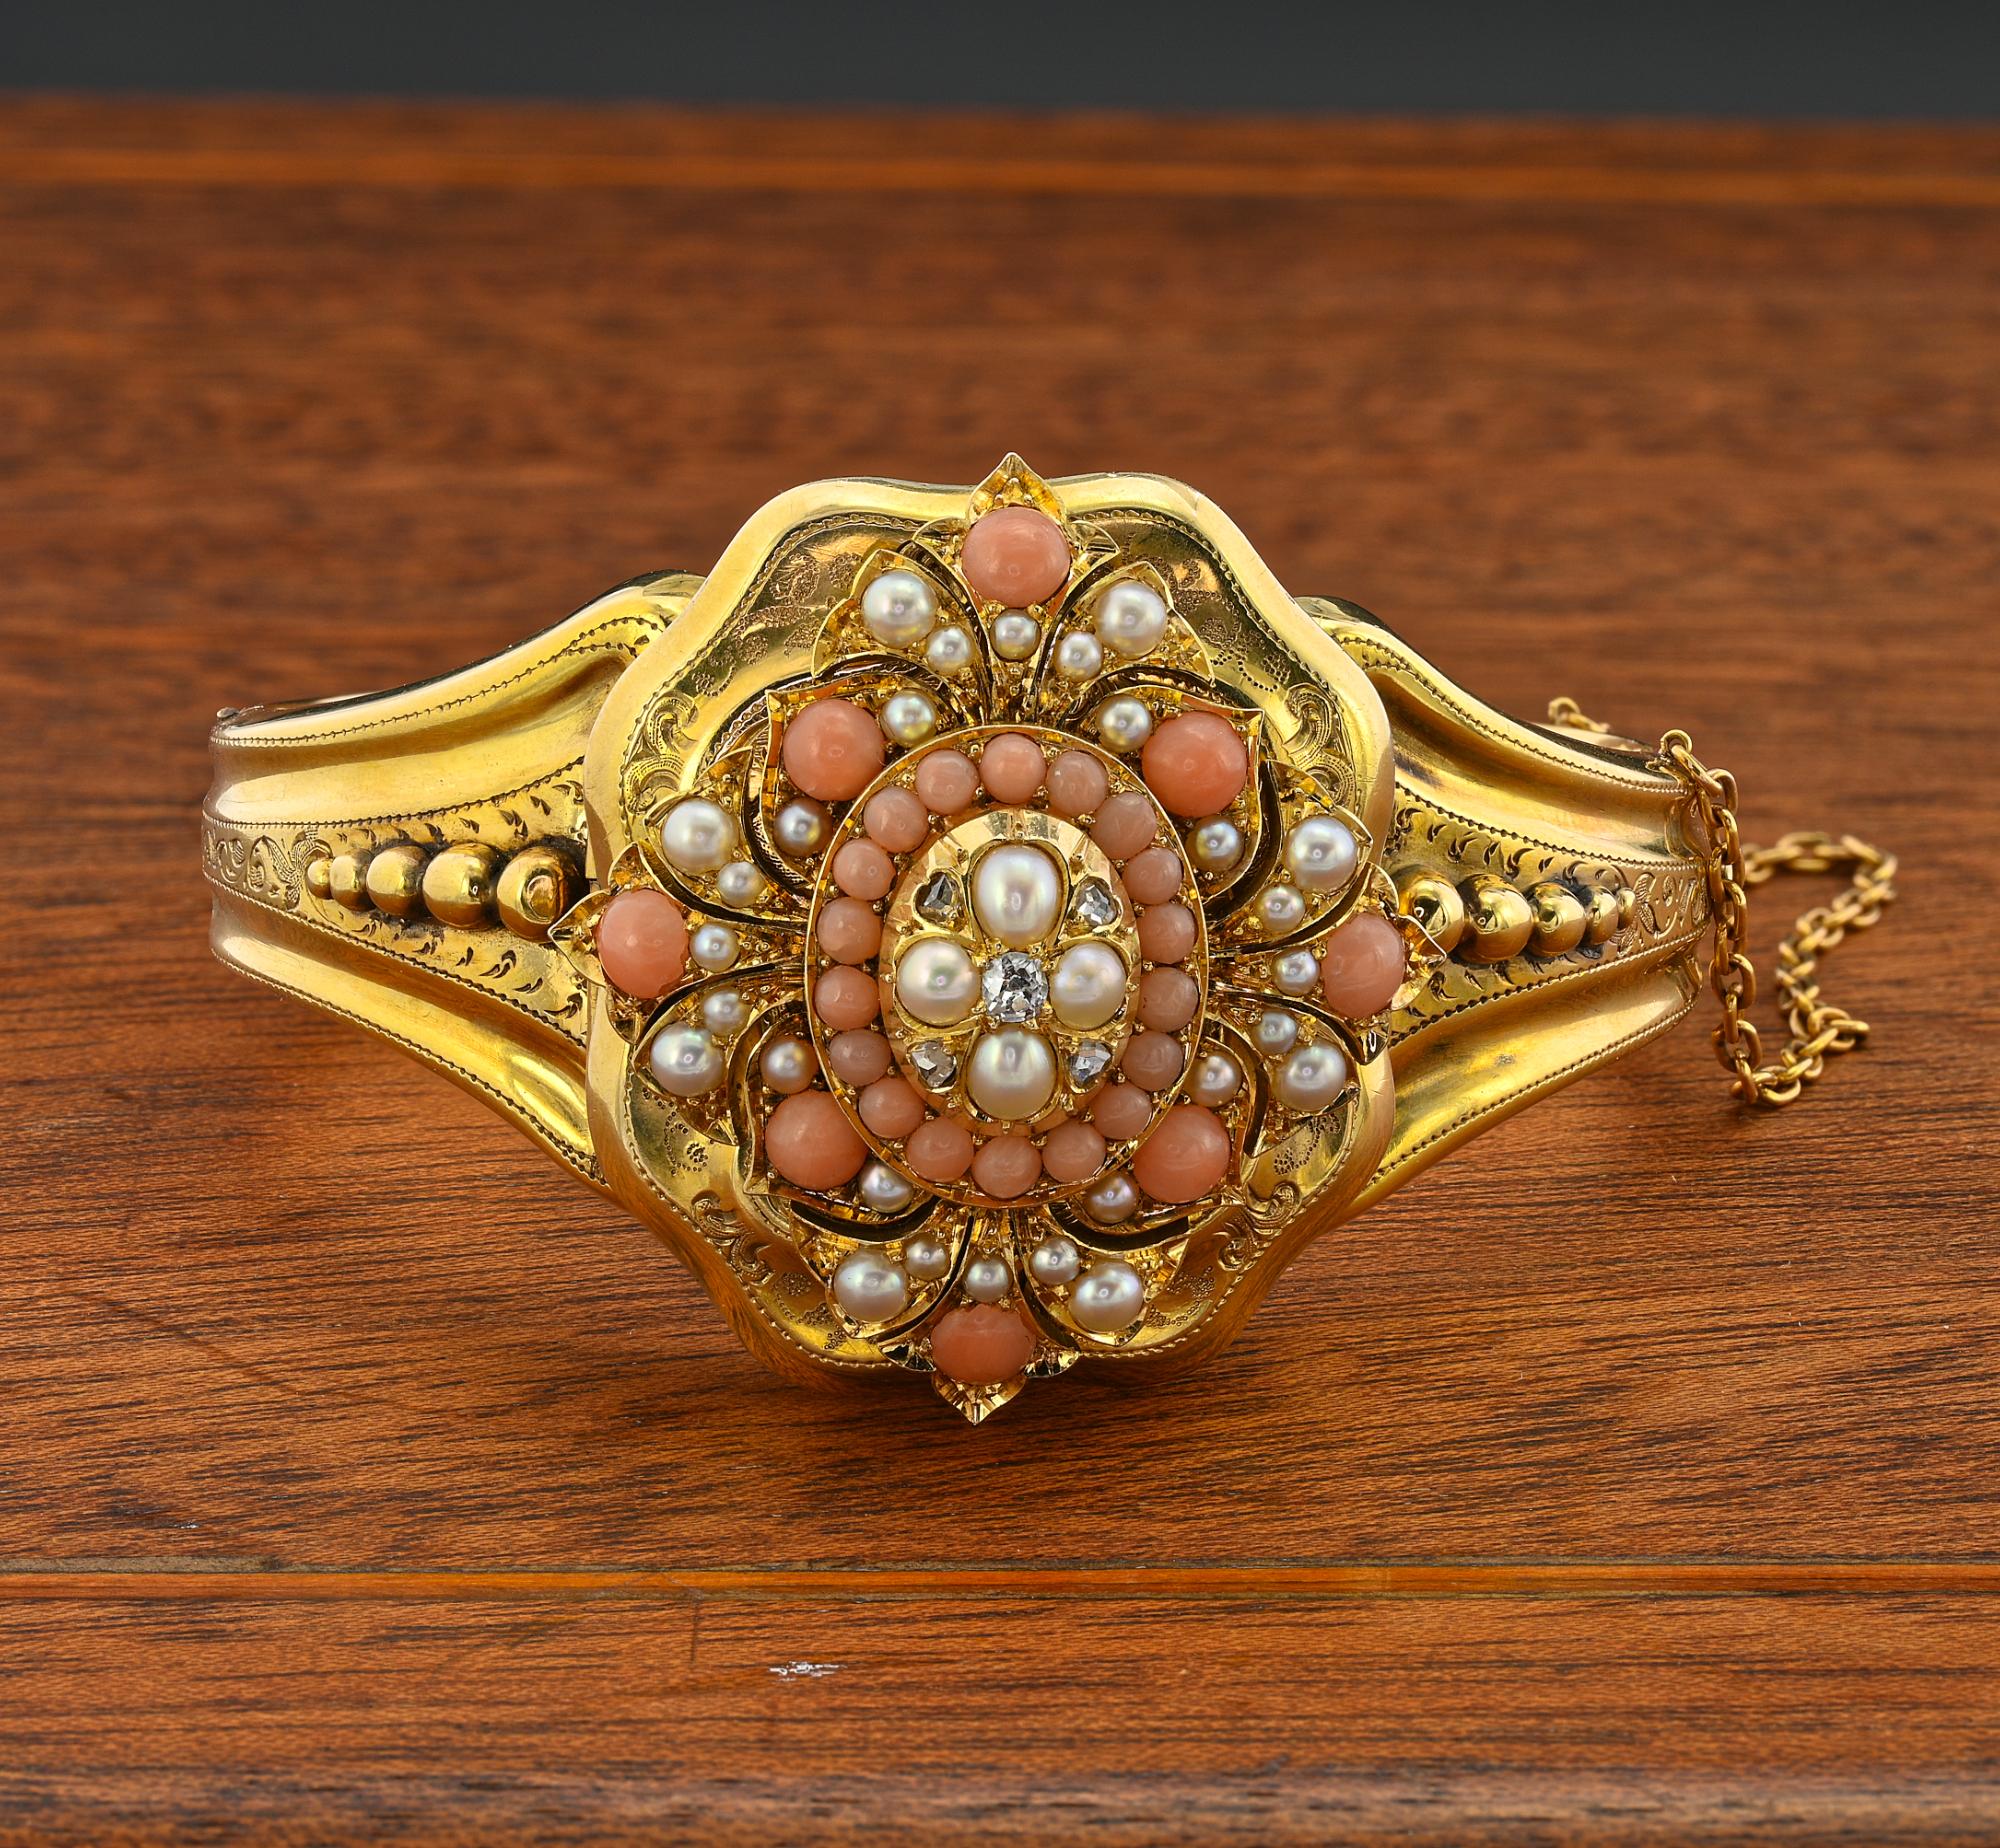 Fascinating romantic example of antique bangle, engraved inside 10th April 1856 – hand crafted of solid 18 KT gold – English origin
Beautiful carved flower design center piece, decorated with natural split pearls of special orient sheen, pastel